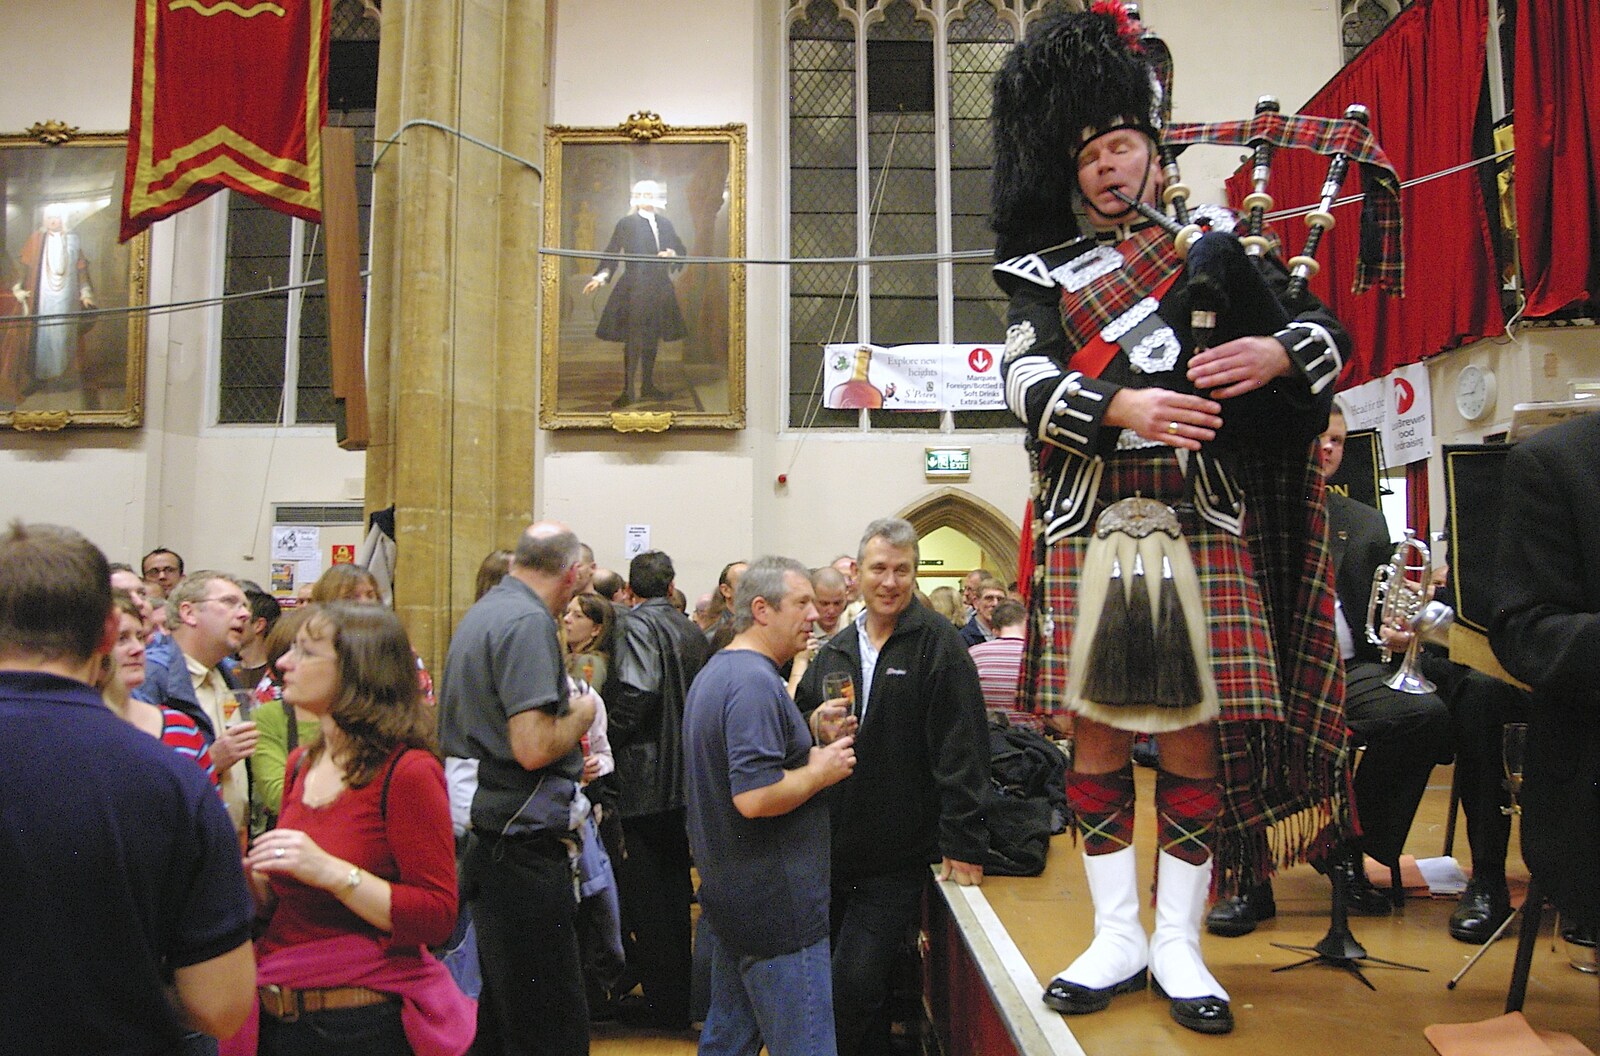 A bagpiper plays with the silver band from The CAMRA Norwich Beer Festival, St. Andrew's Hall, Norwich - 25th October 2006